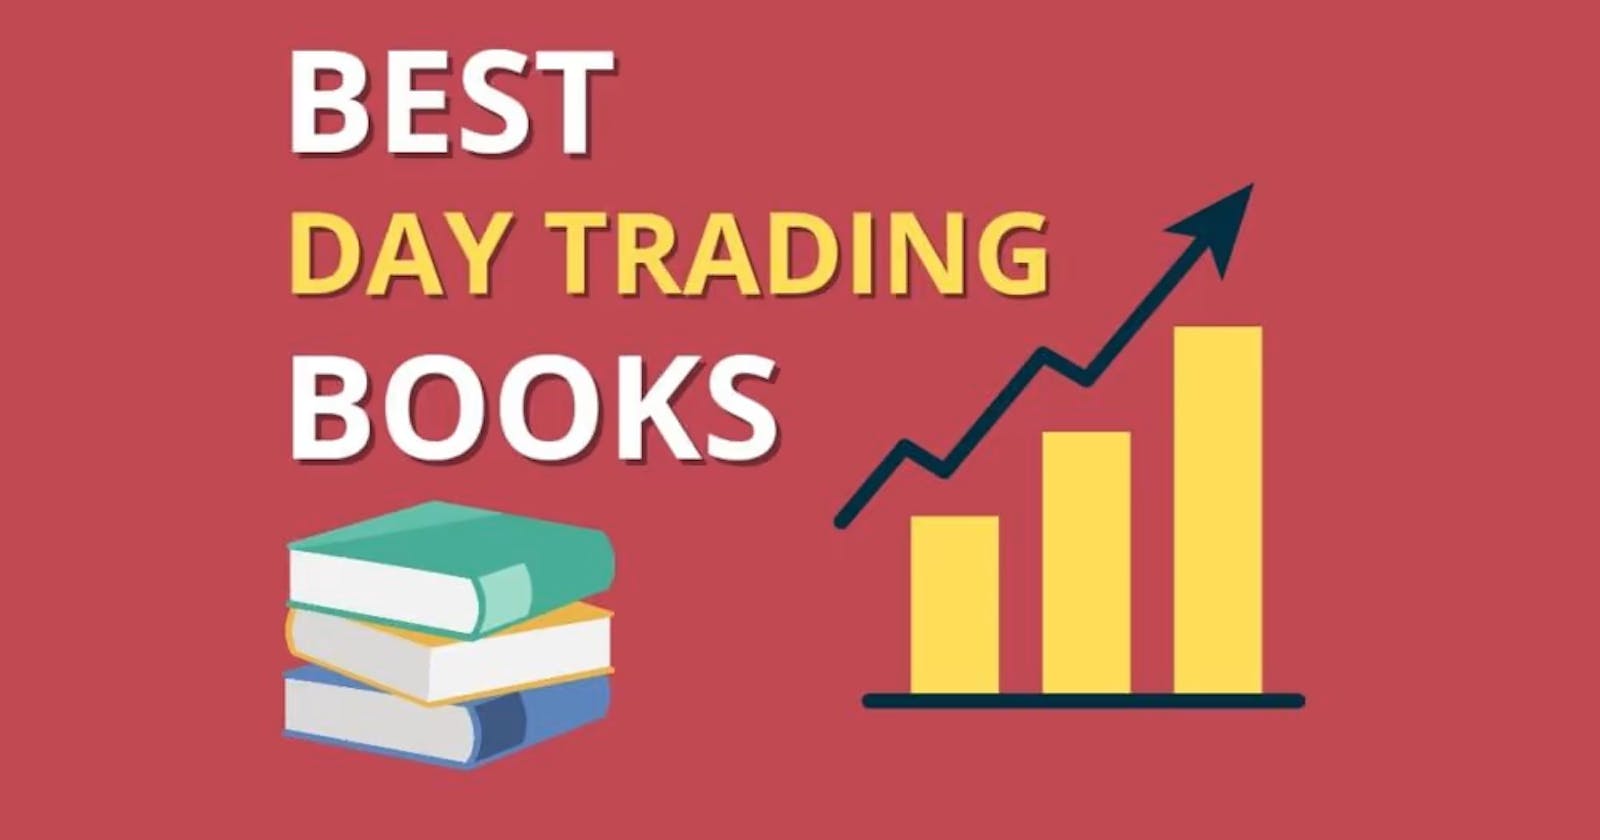 Day Trading Books for Beginners